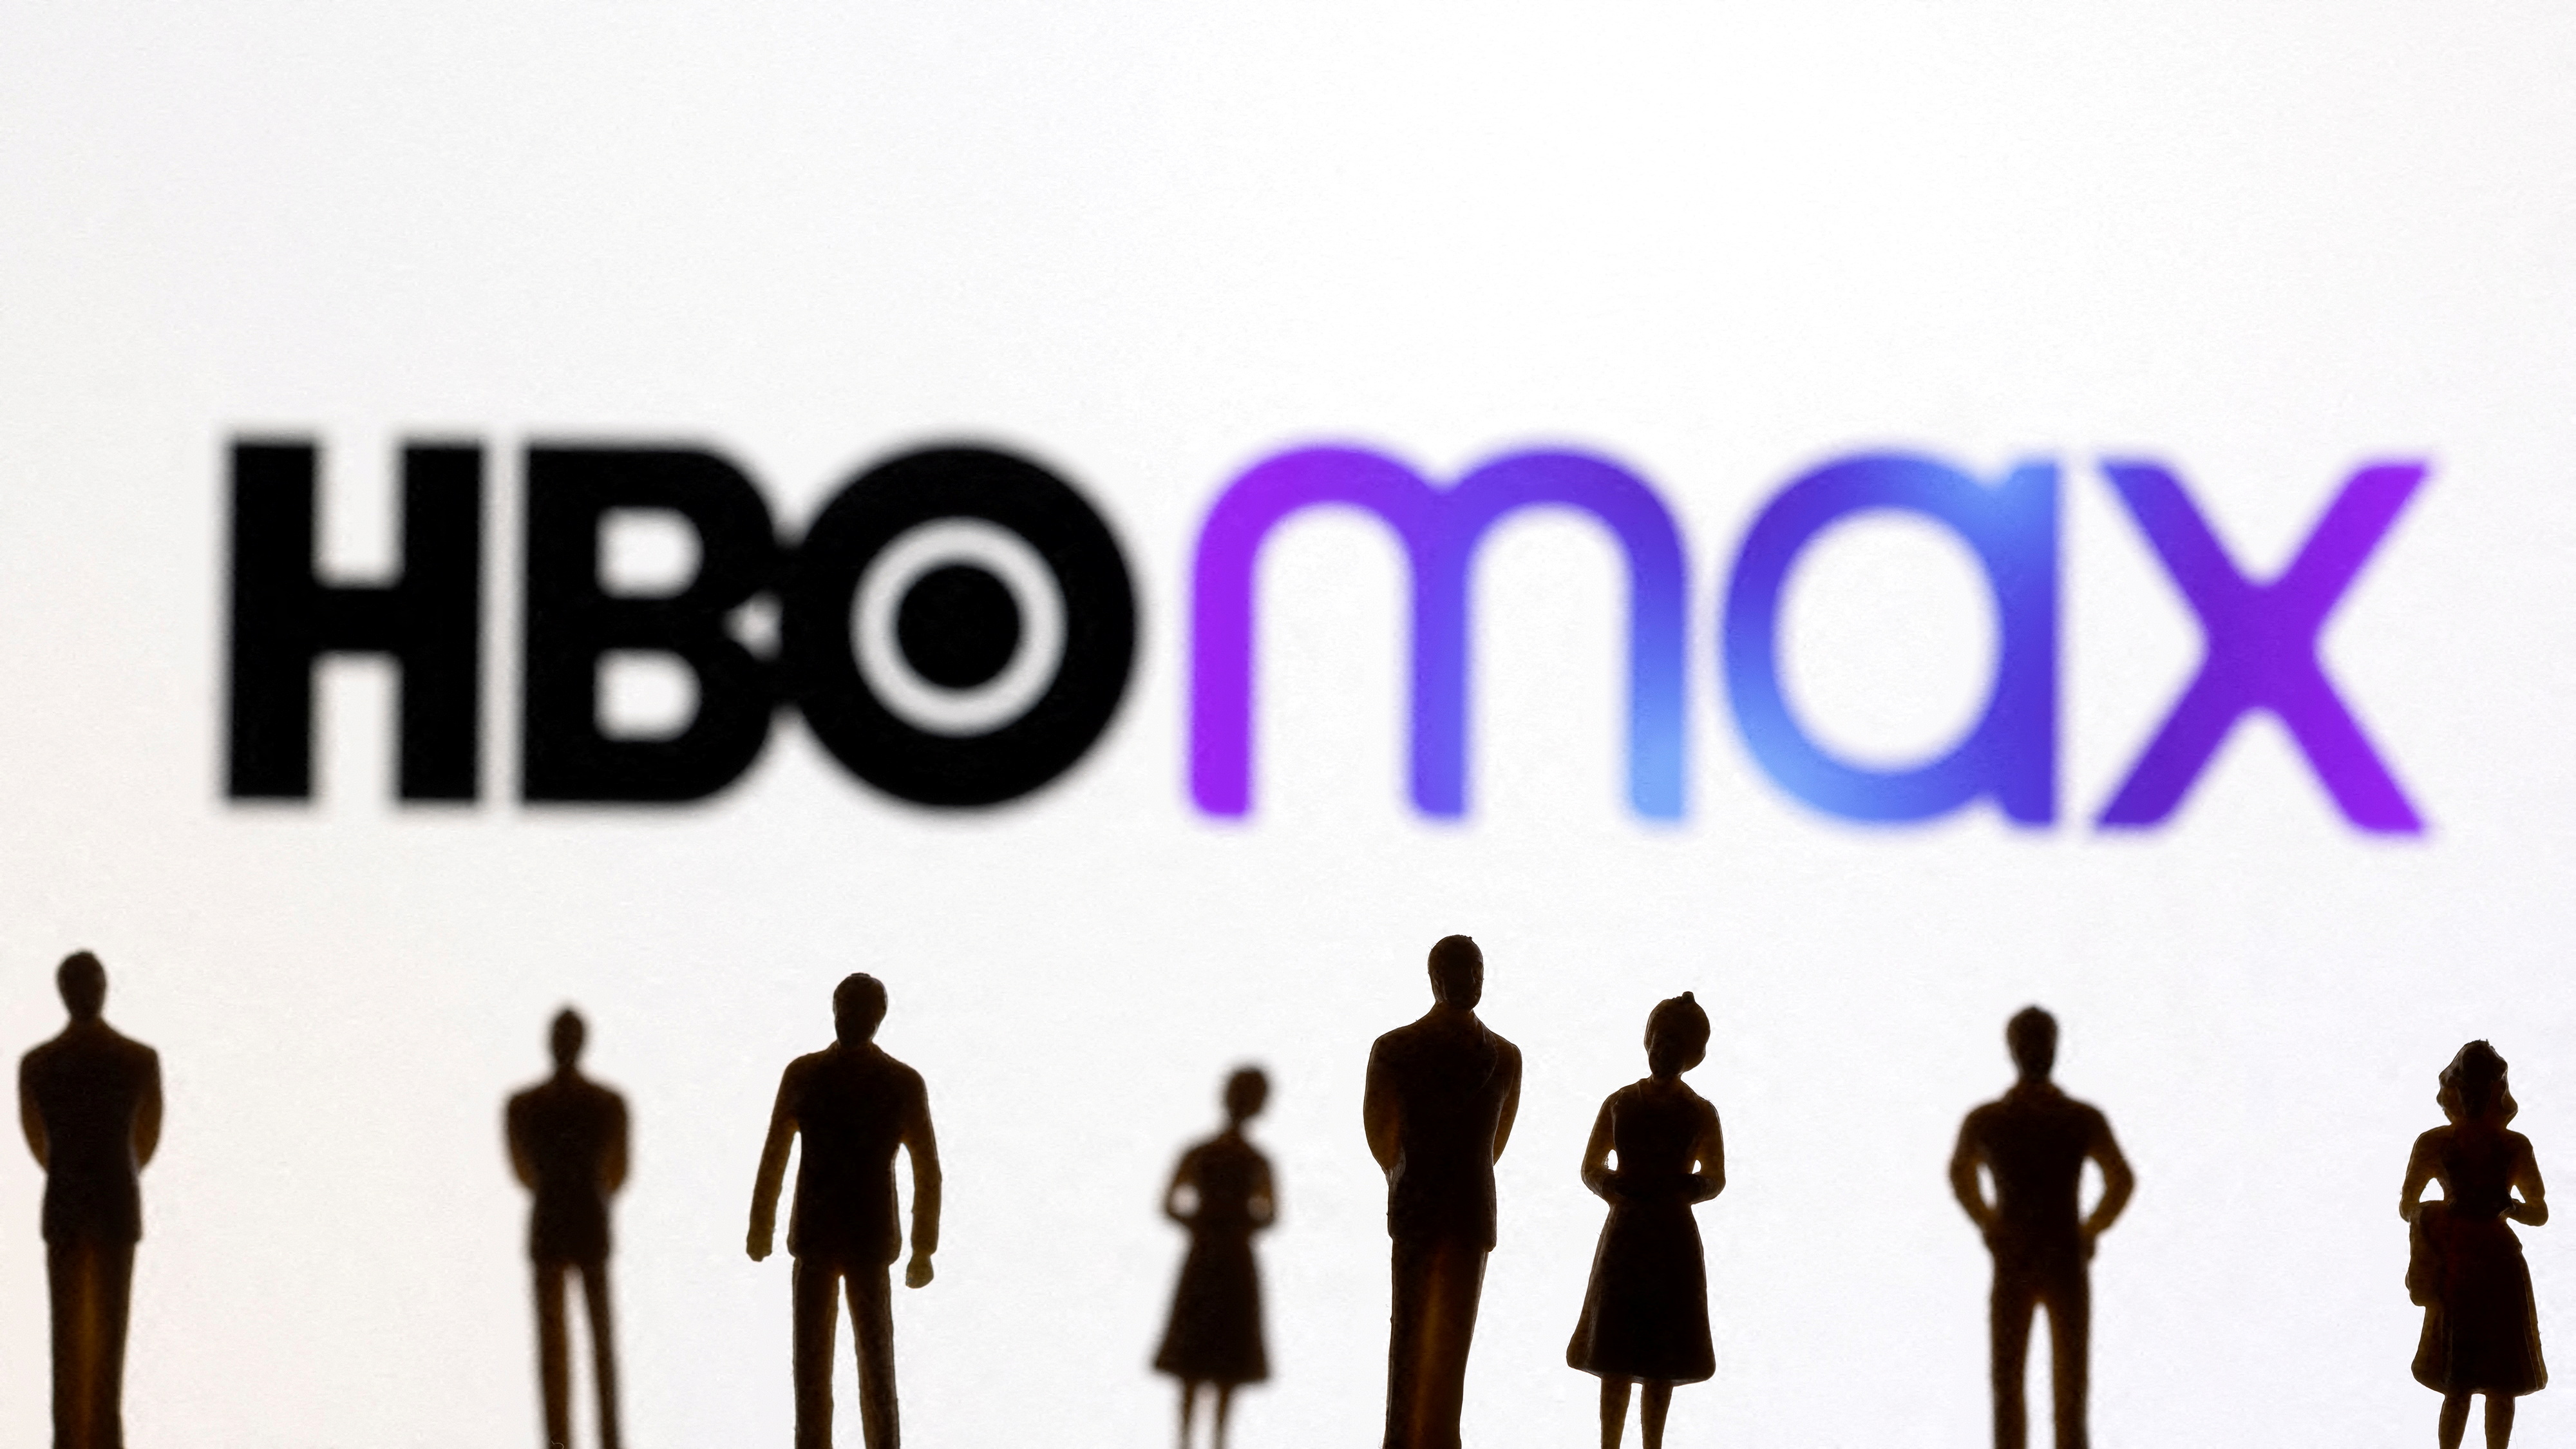 FILE PHOTO: Toy figures of people are seen in front of the displayed HBO Max logo, in this illustration taken January 20, 2022. REUTERS/Dado Ruvic/Illustration/File Photo